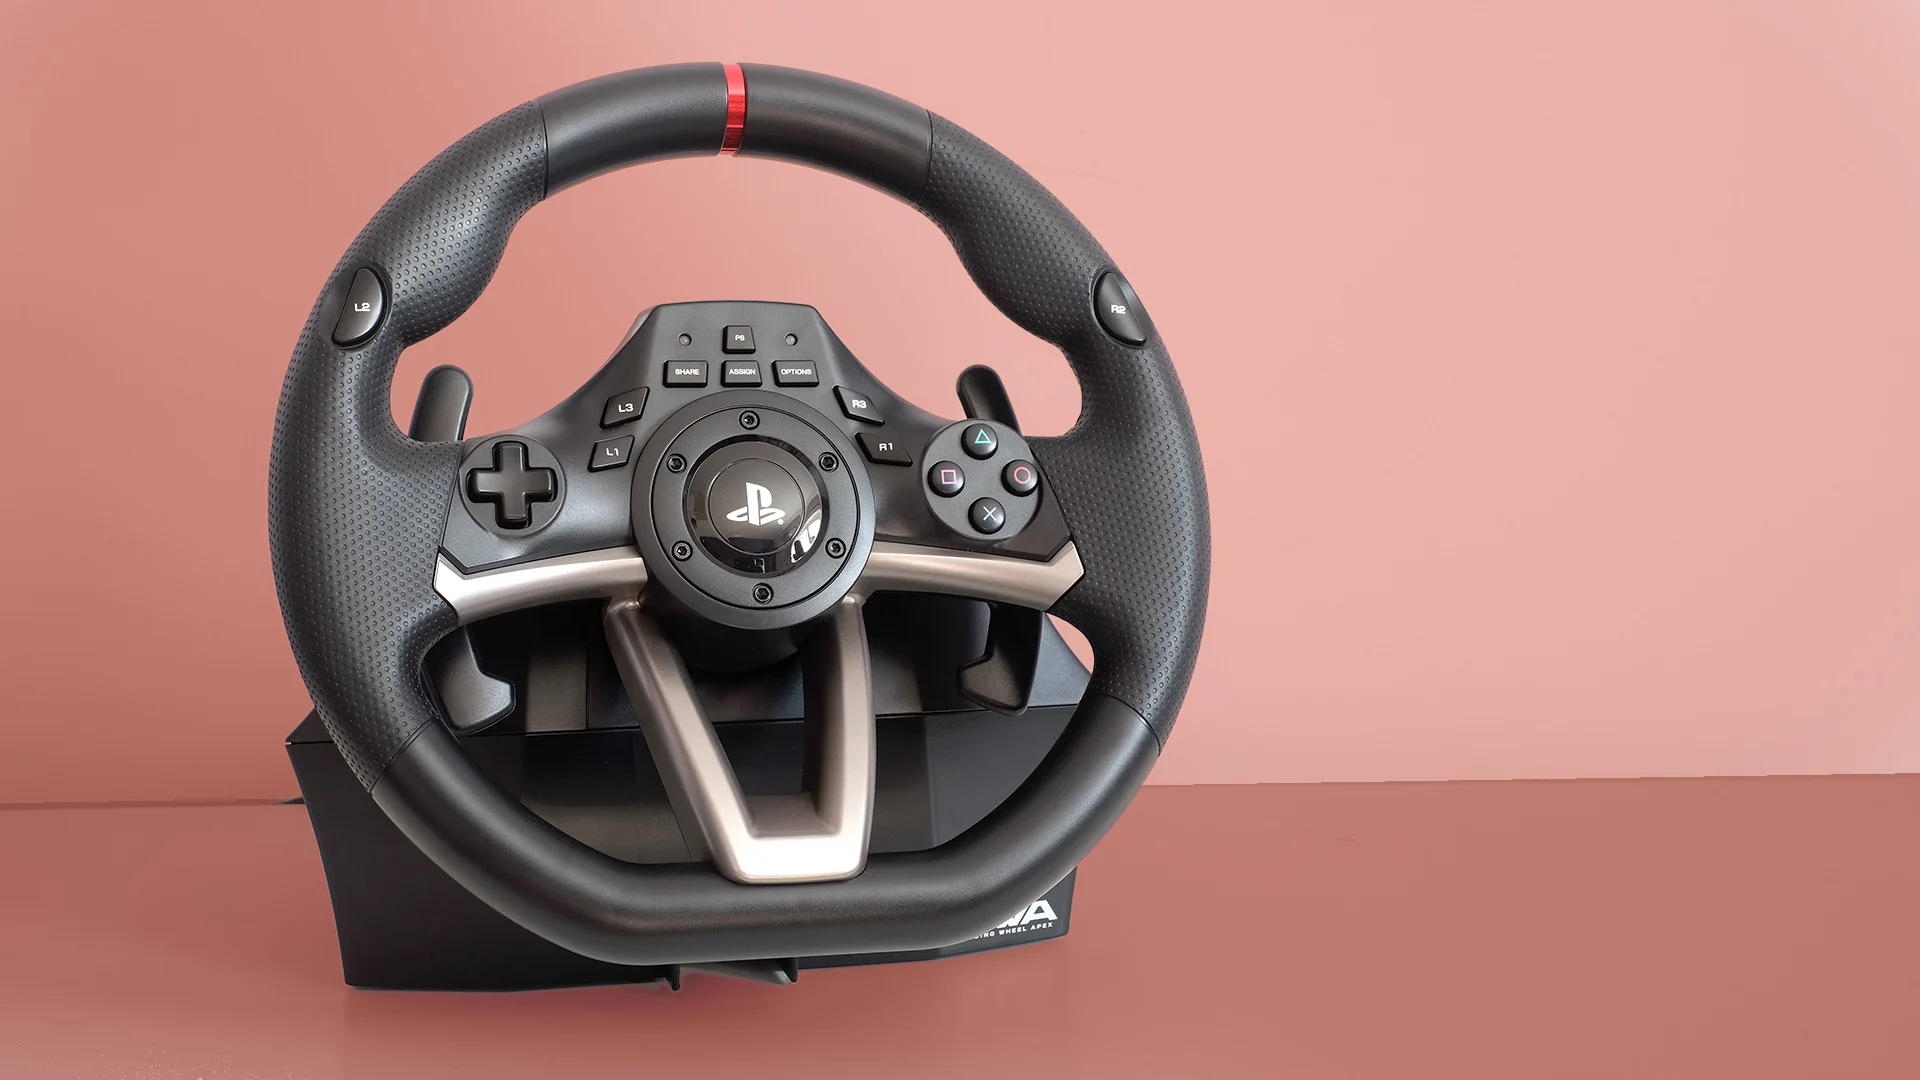 How To Connect A Hori Racing Wheel To PS4